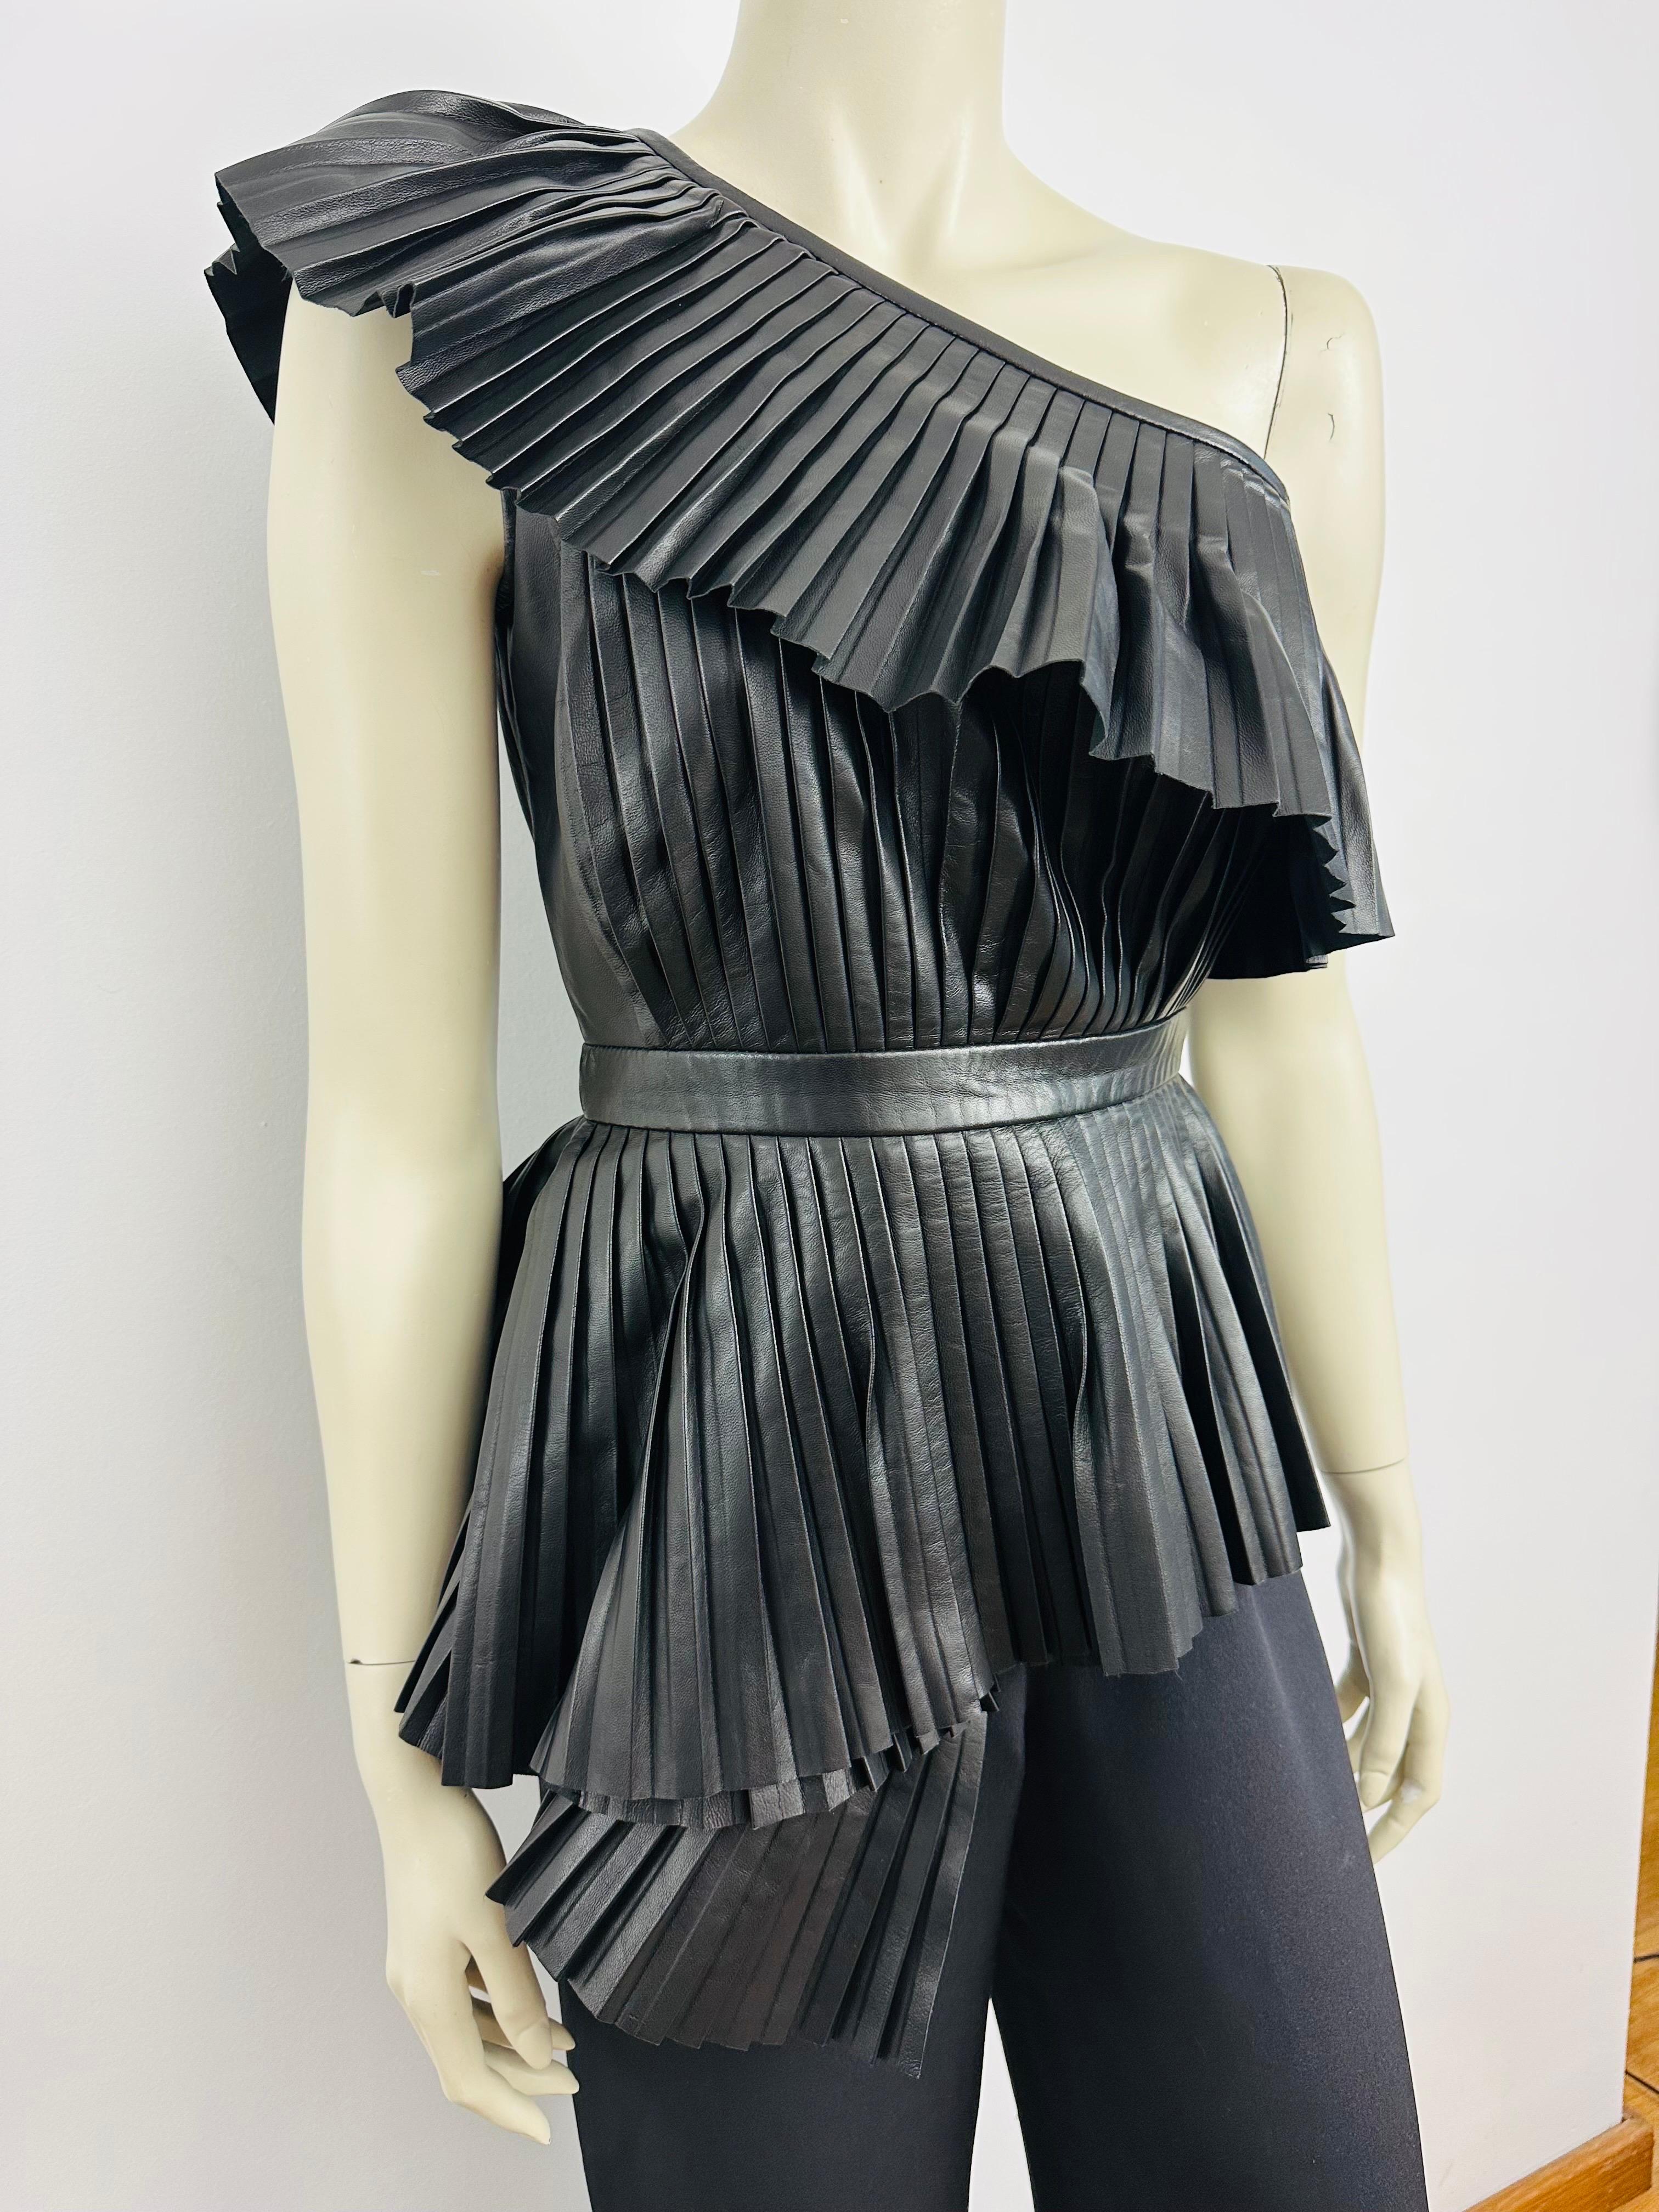 Women's Balmain one shoulder pleated leather top Pre fall 2015 For Sale